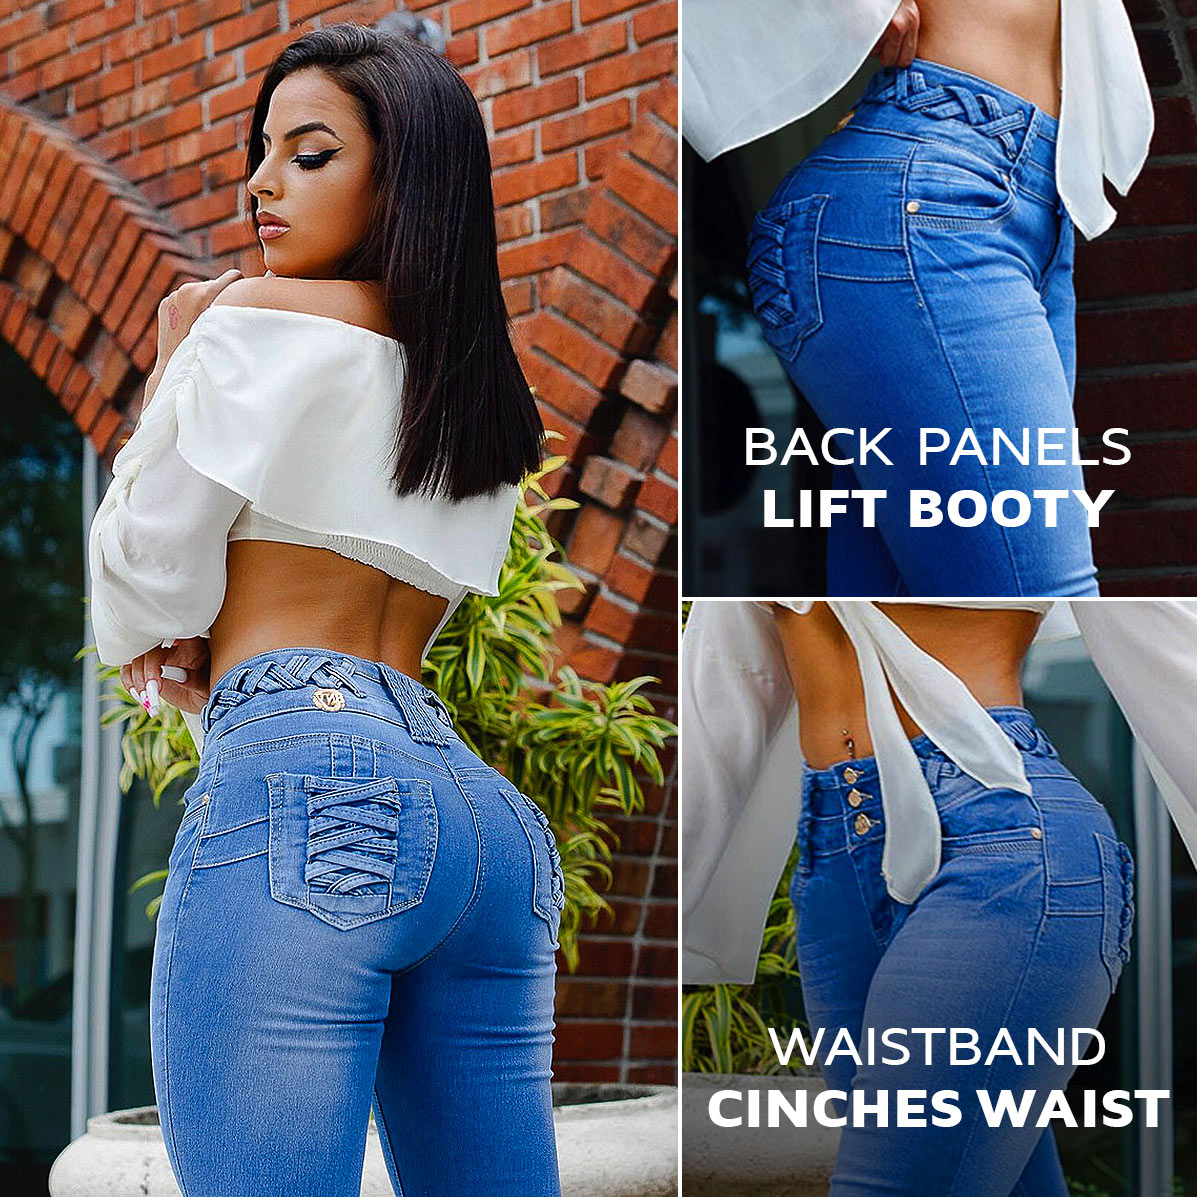 MX Jeans Back Panels Lift Booty & Waistband Cinches Your Waist